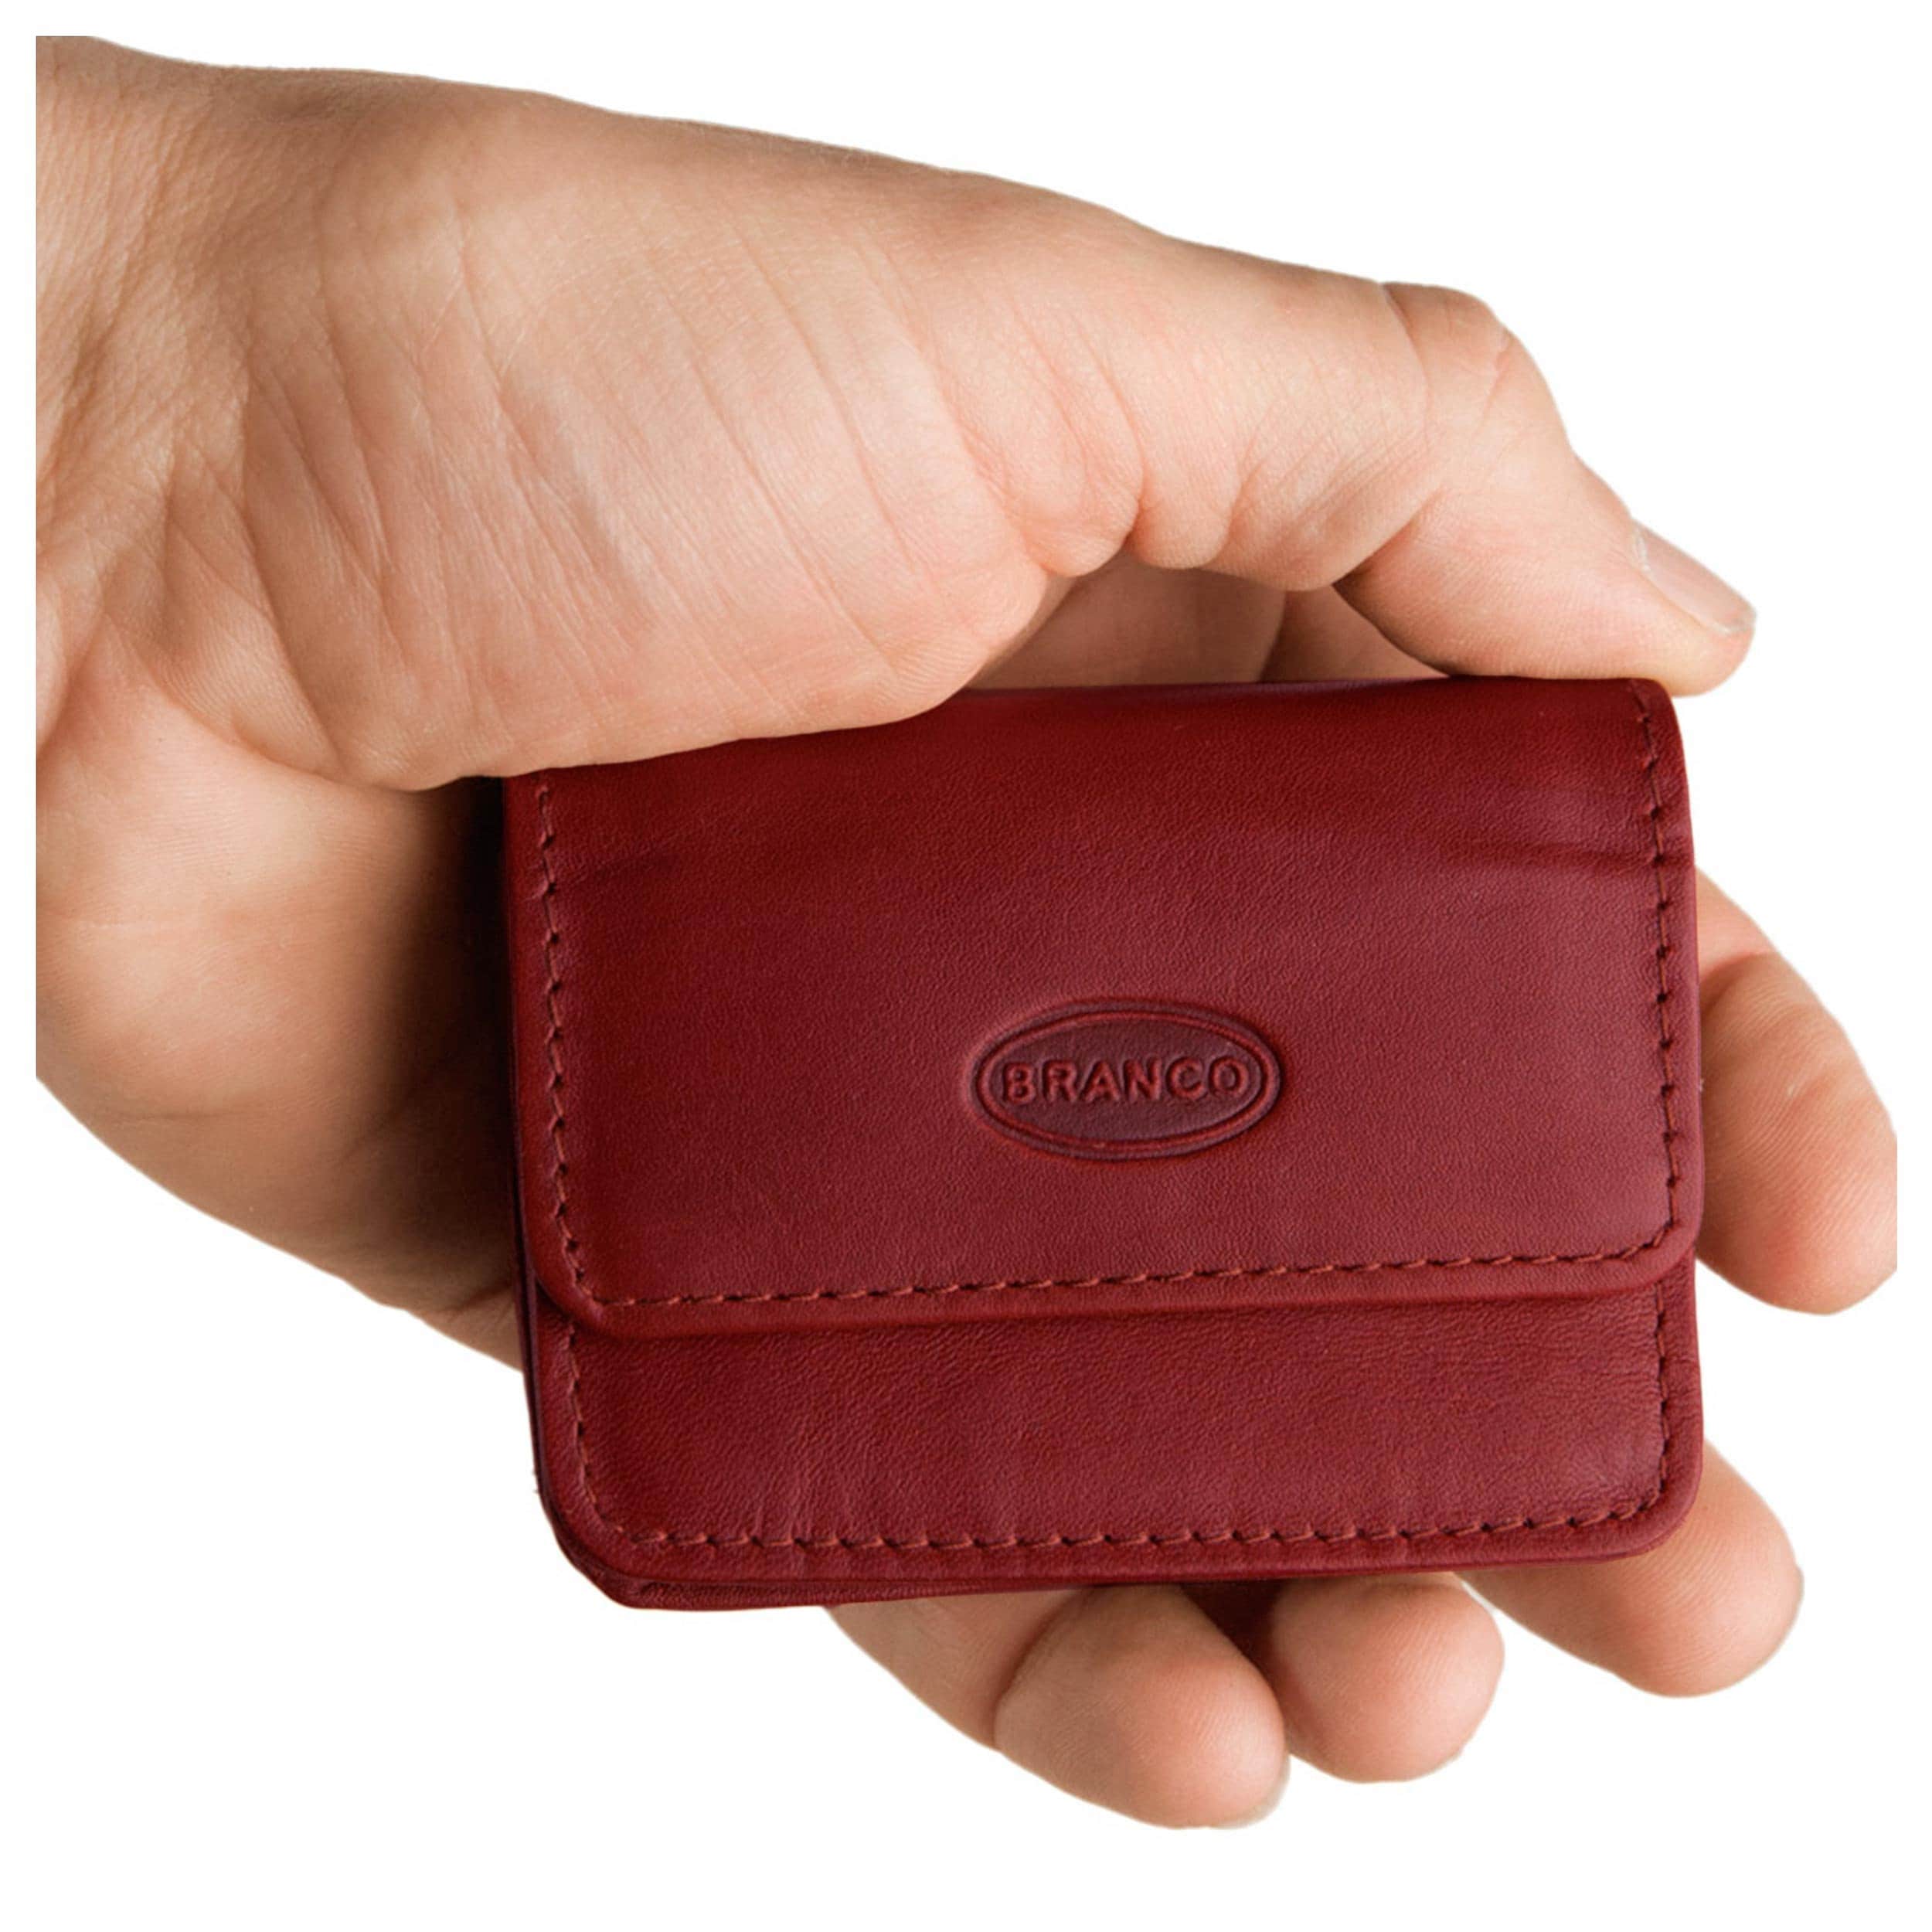 Accessorize Red Coin Purse 2760968.htm - Buy Accessorize Red Coin Purse  2760968.htm online in India